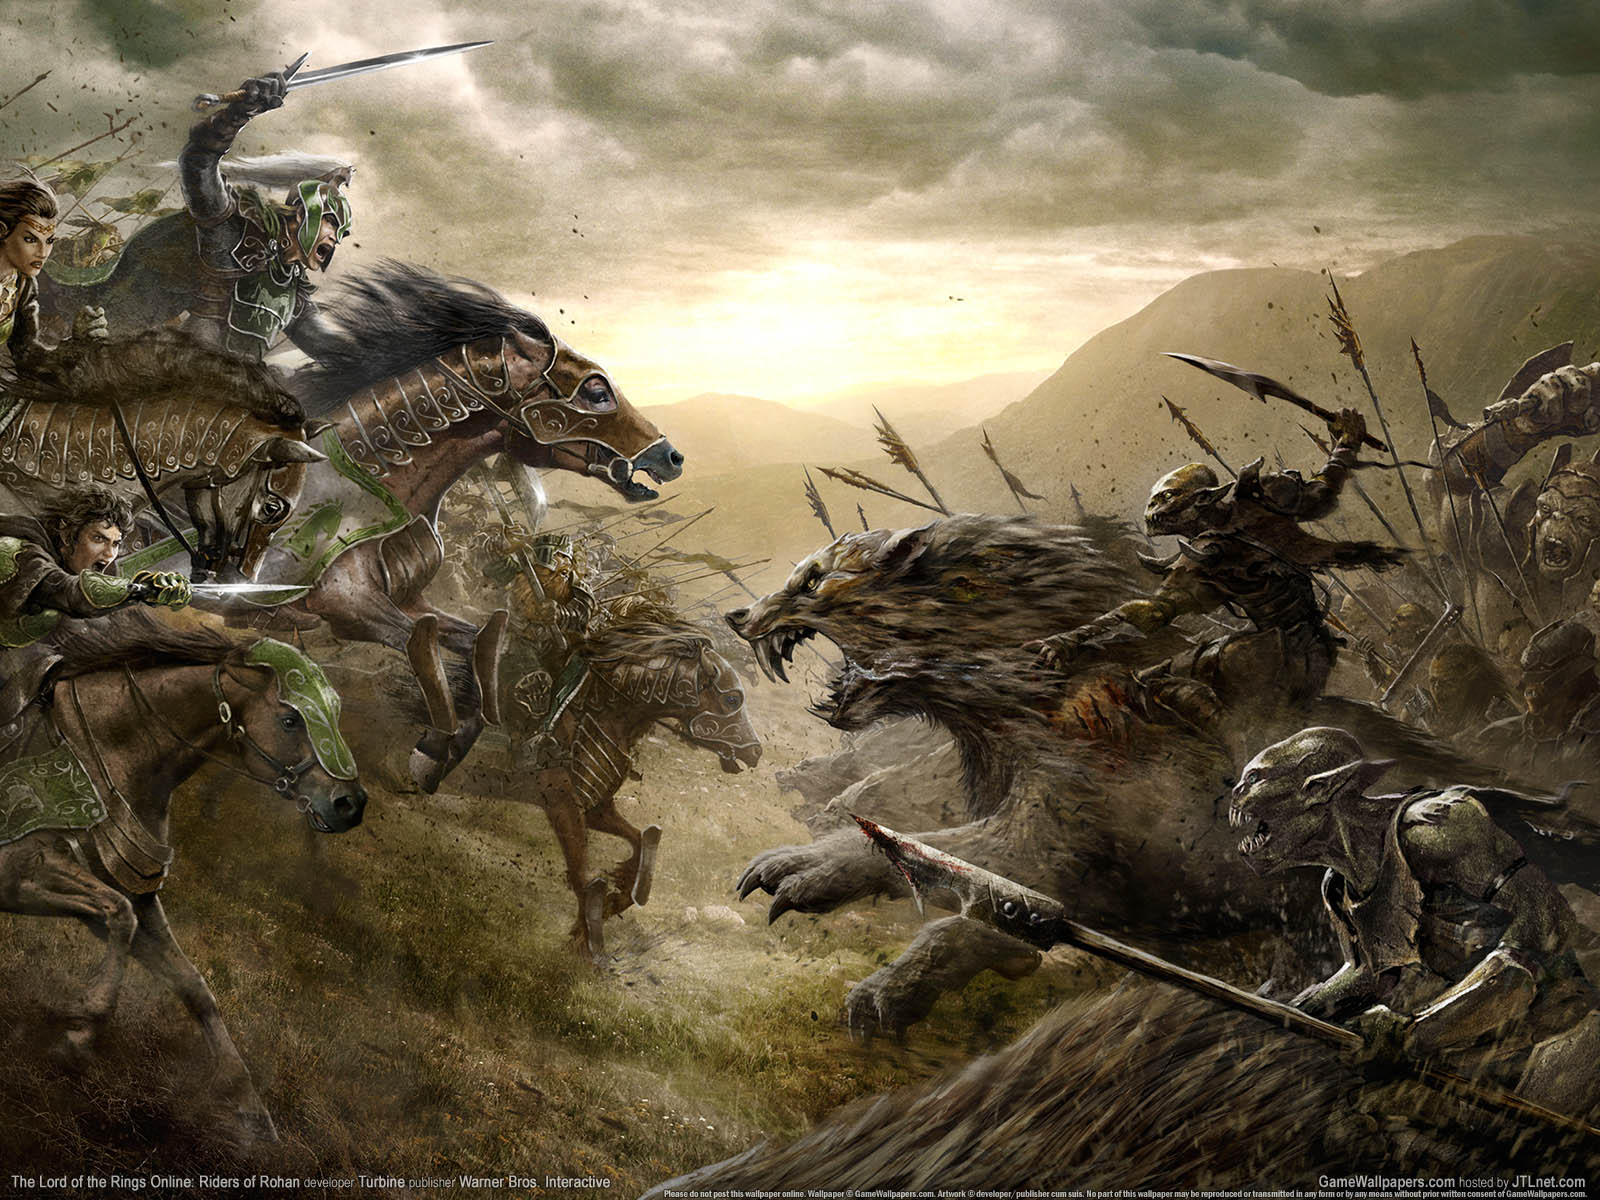 The Lord of the Rings Online%3A Riders of Rohan fond d'cran 01 1600x1200